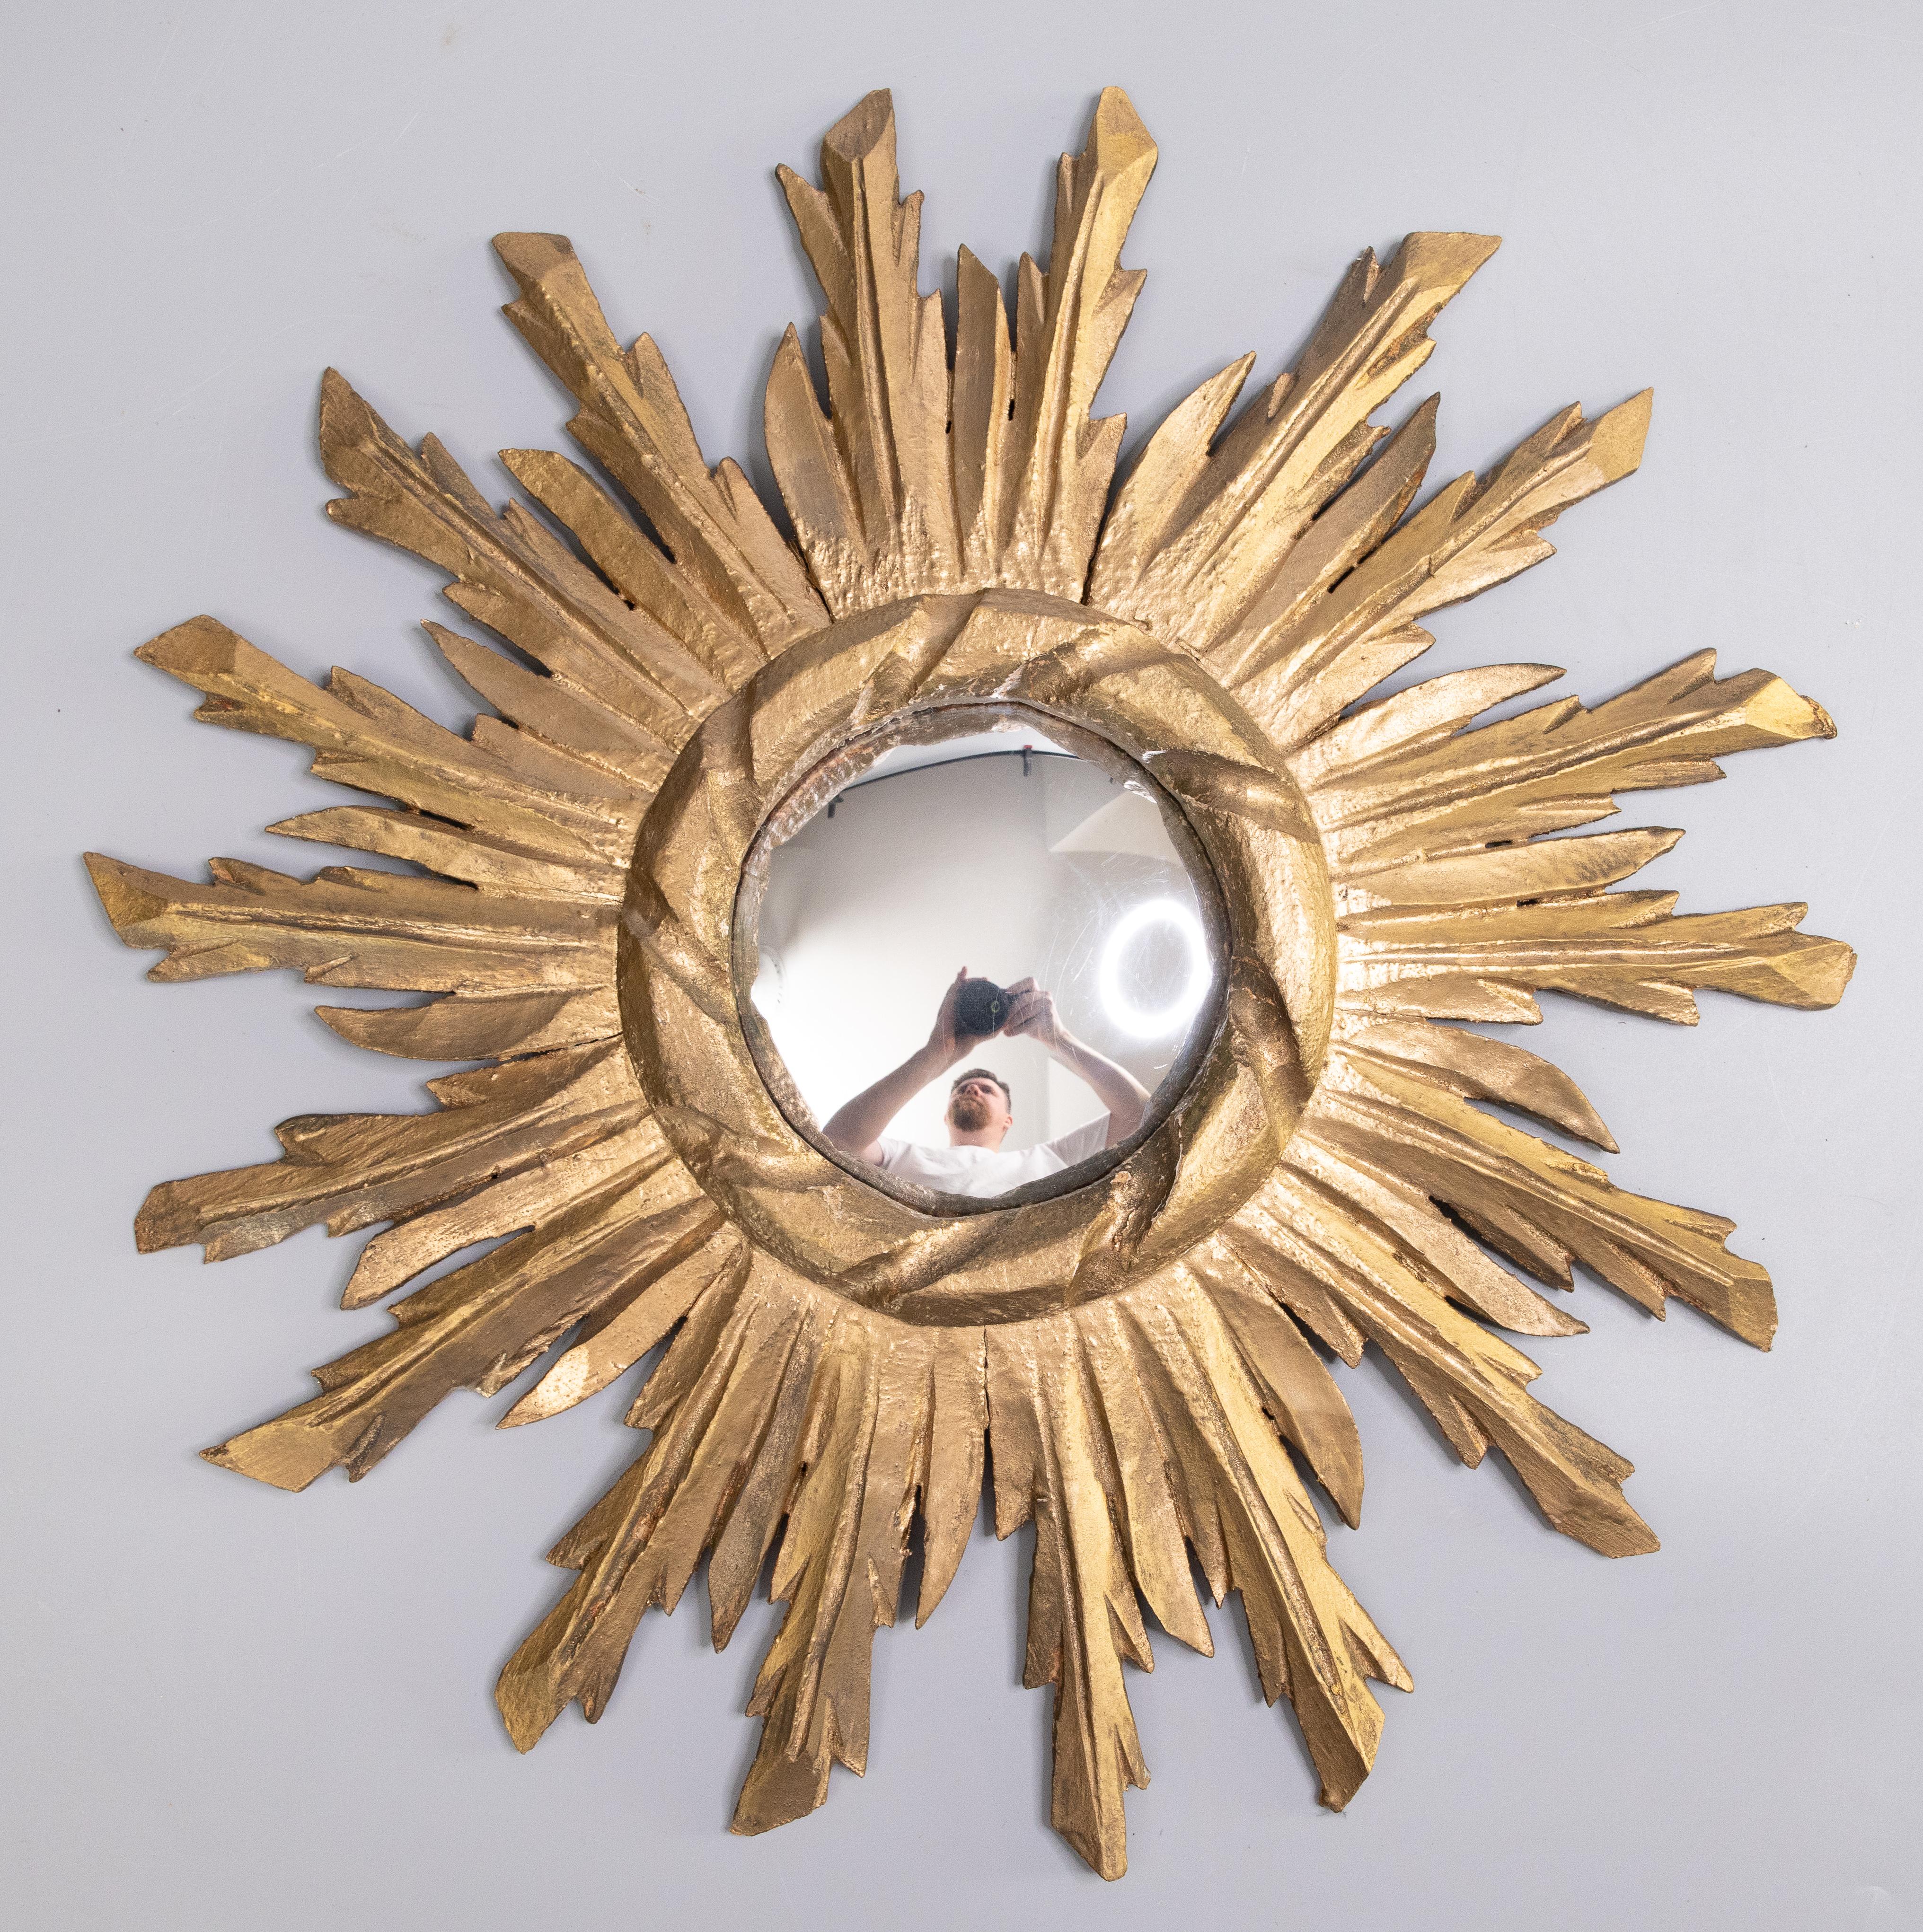 A stunning vintage French gilded wood sunburst or starburst mirror, circa 1950. It retains the original convex mirror which is surrounded by hand carved rays of alternating lengths with a lovely gilt patina.

DIMENSIONS
17